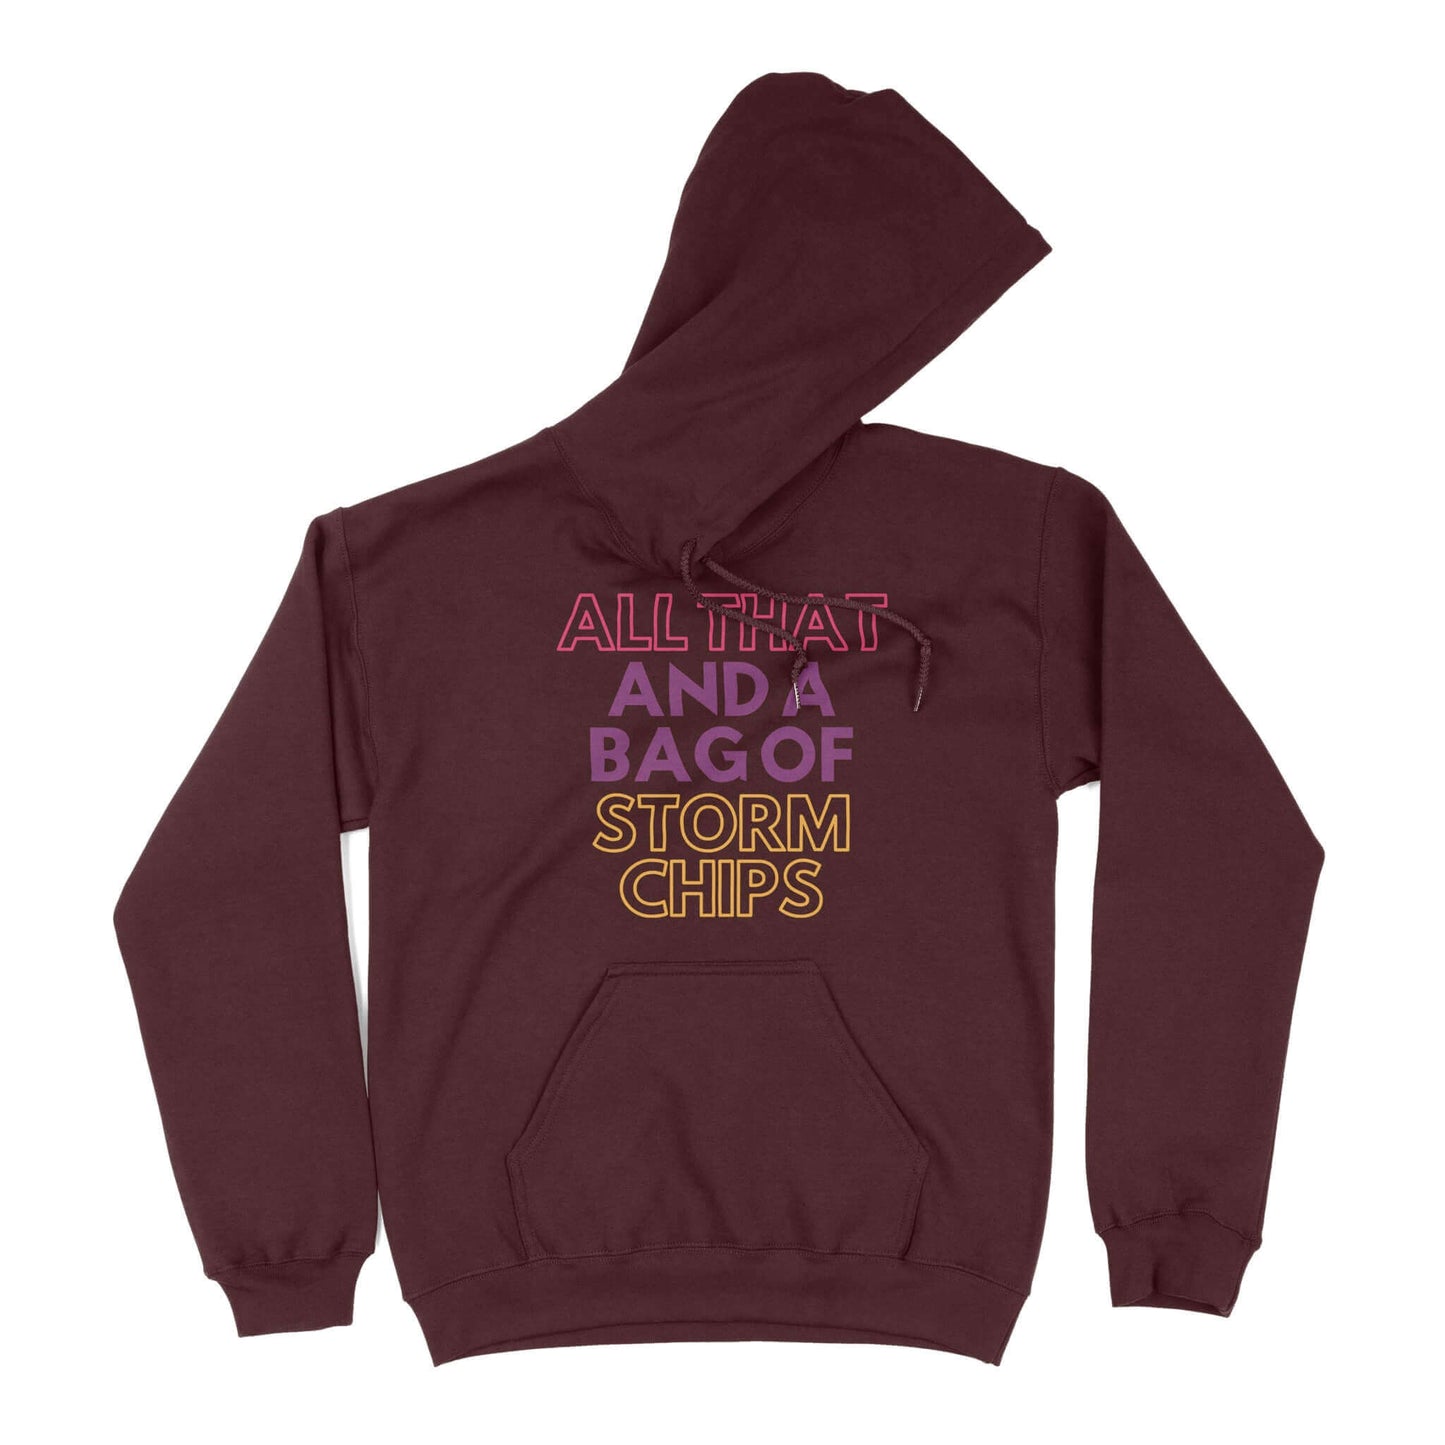 All That and a Bag of Storm Chips Unisex Hoodie in Color: Heather Sport Dark Maroon - East Coast AF Apparel